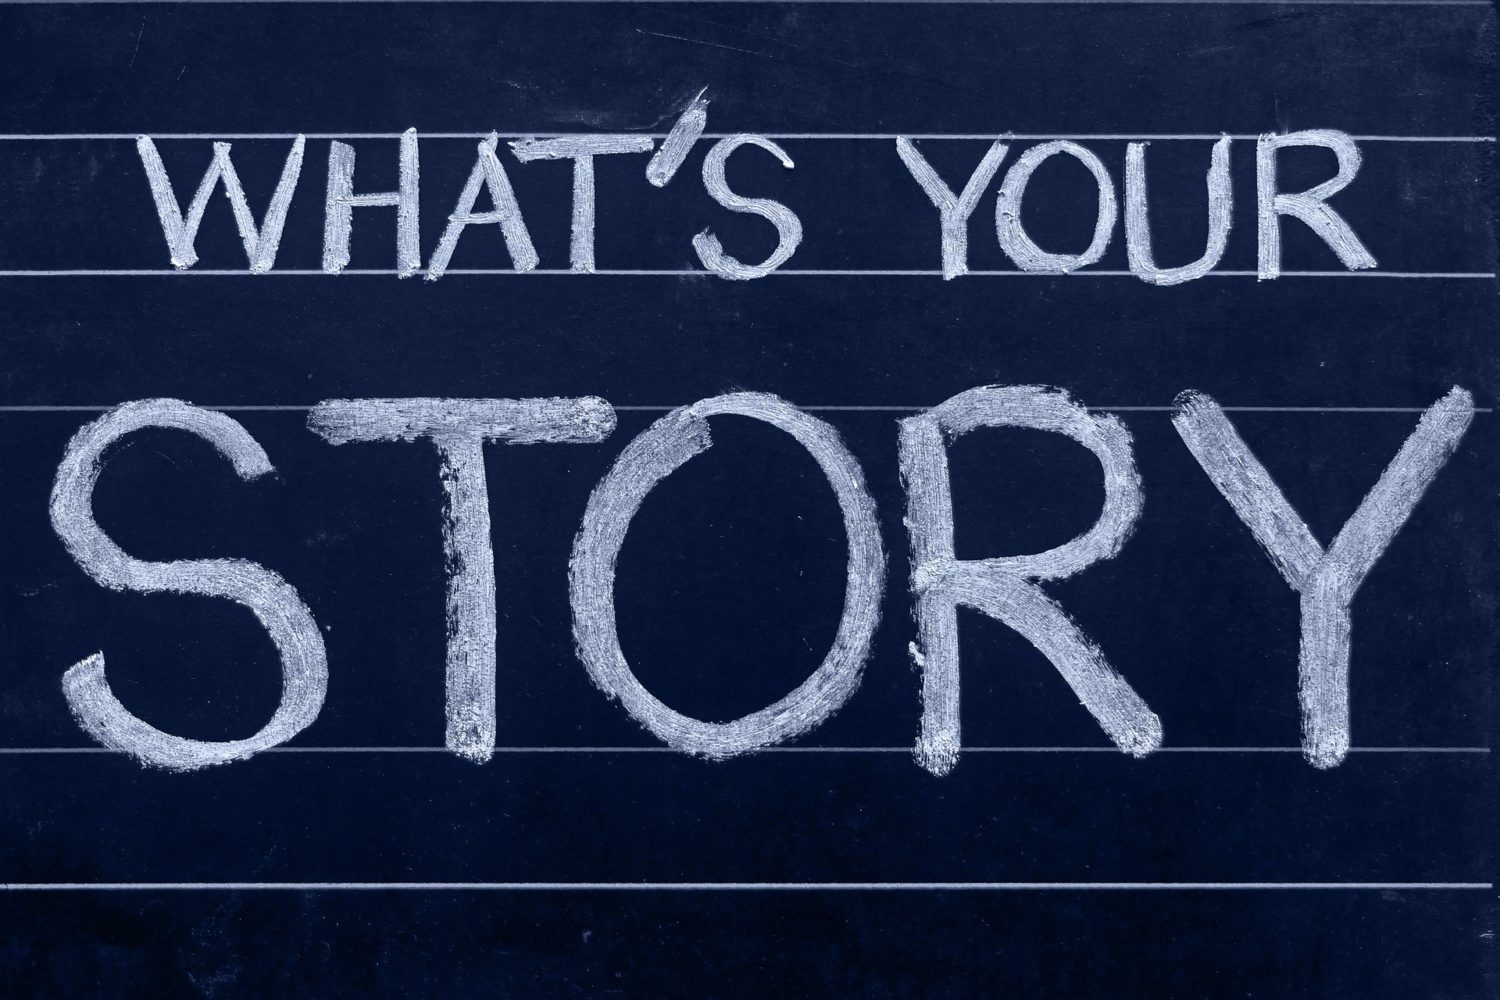 Delve into the past, present and future of your company to get ideas for stories to tell.